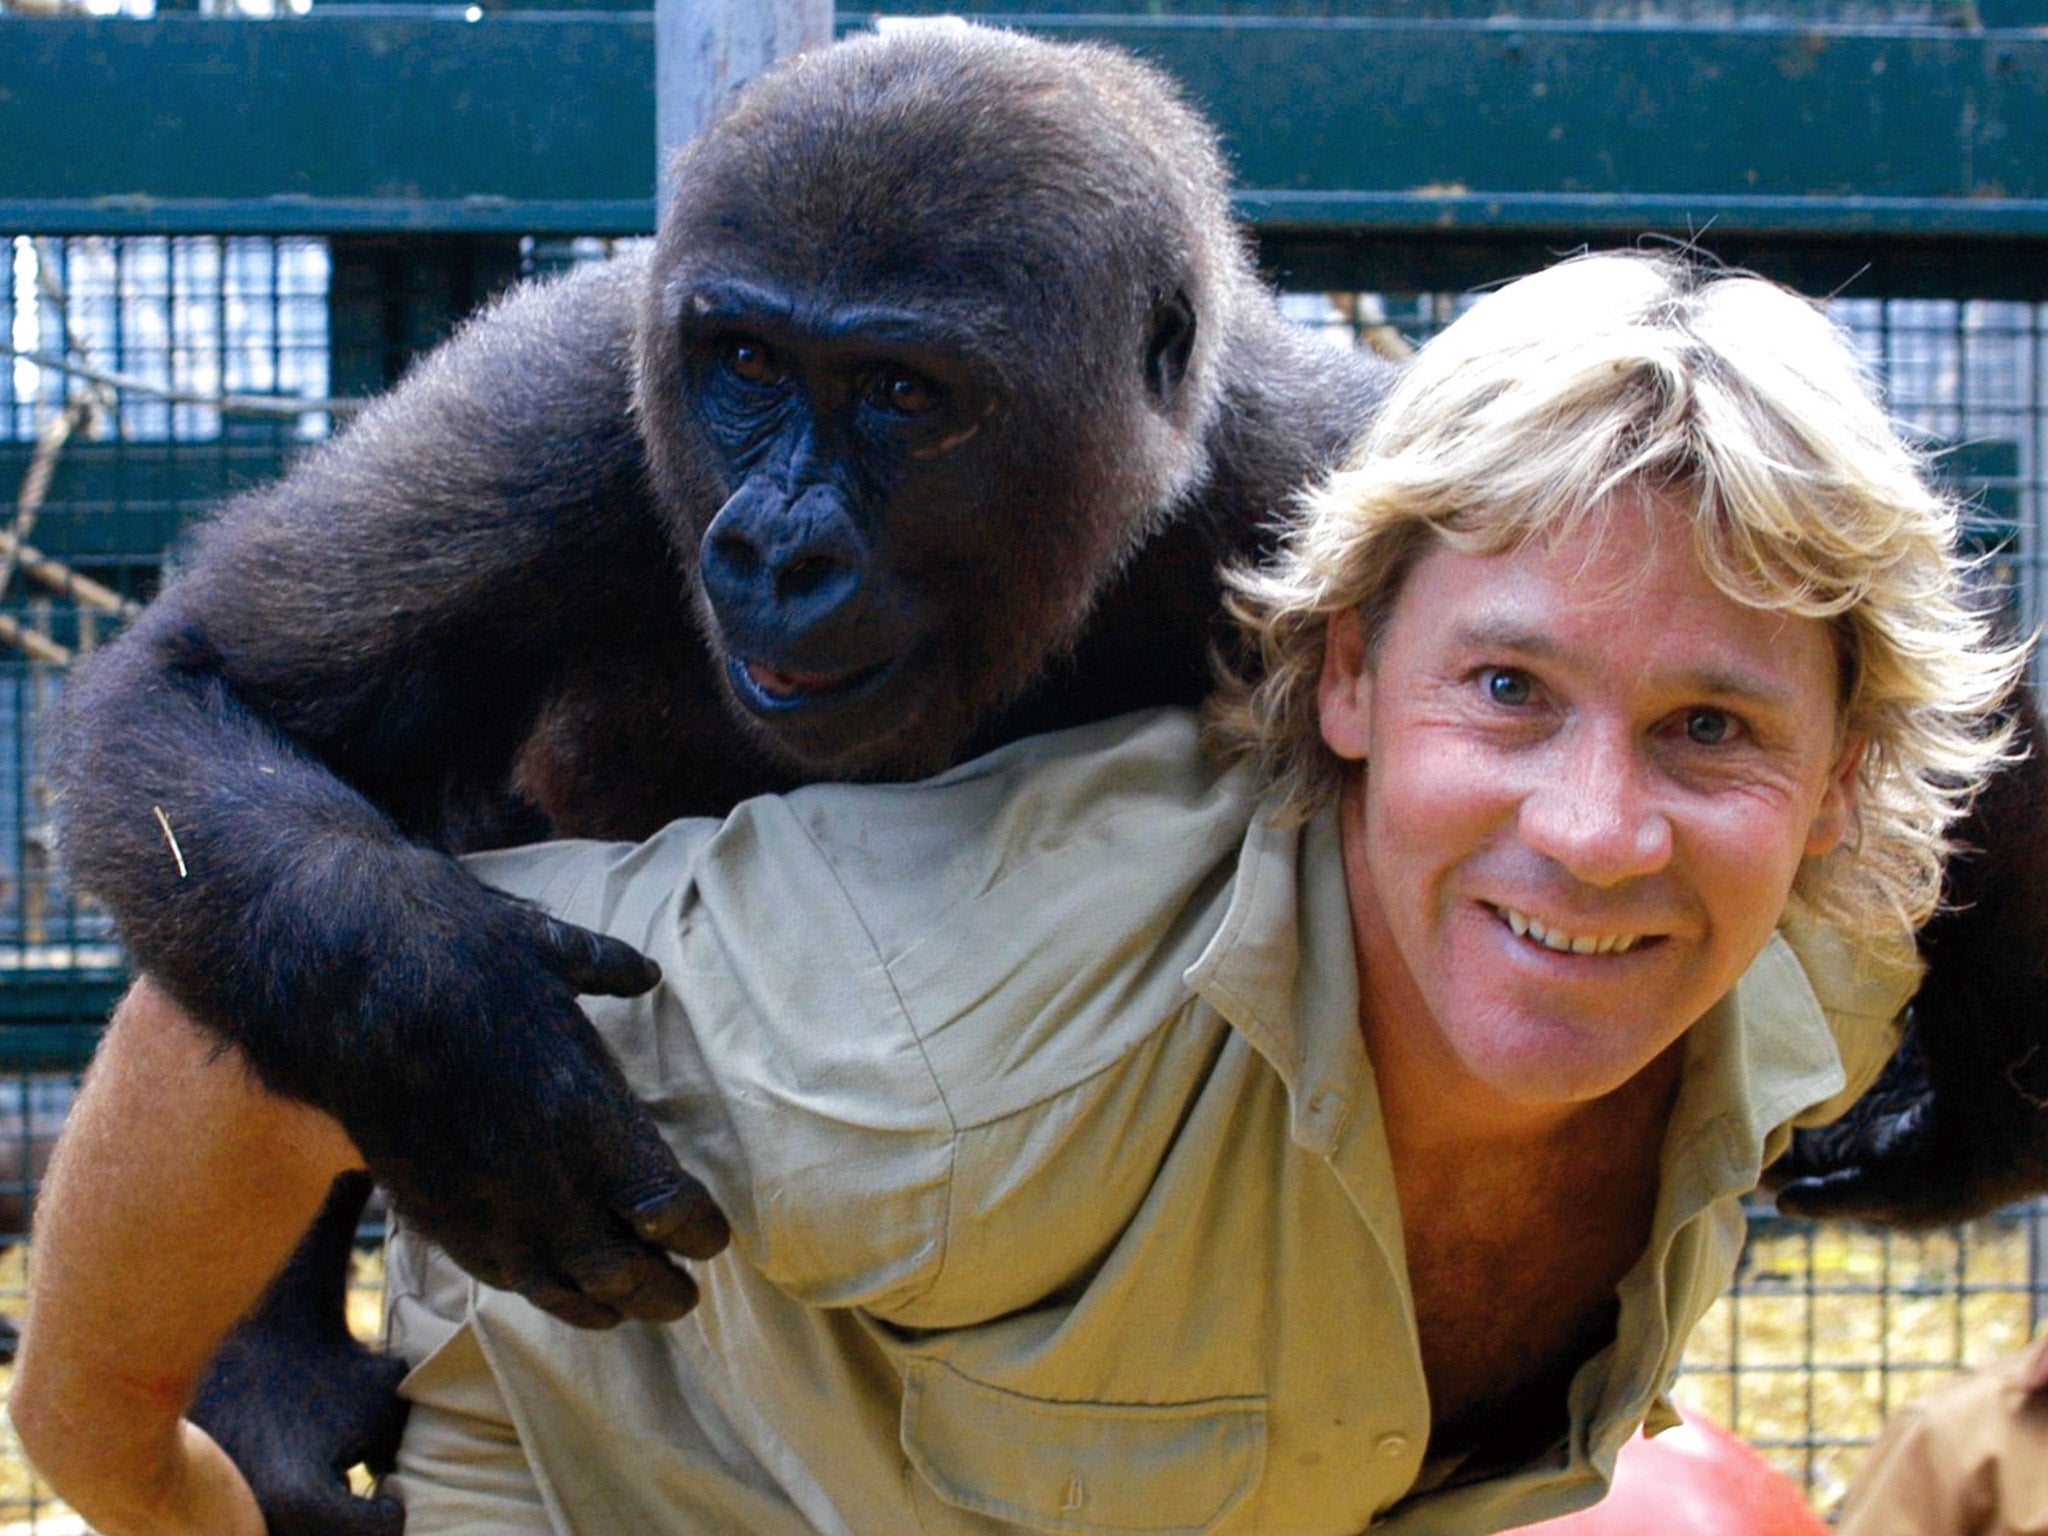 Steve Irwin died in 2006 while recording a show on the Great Barrier Reef